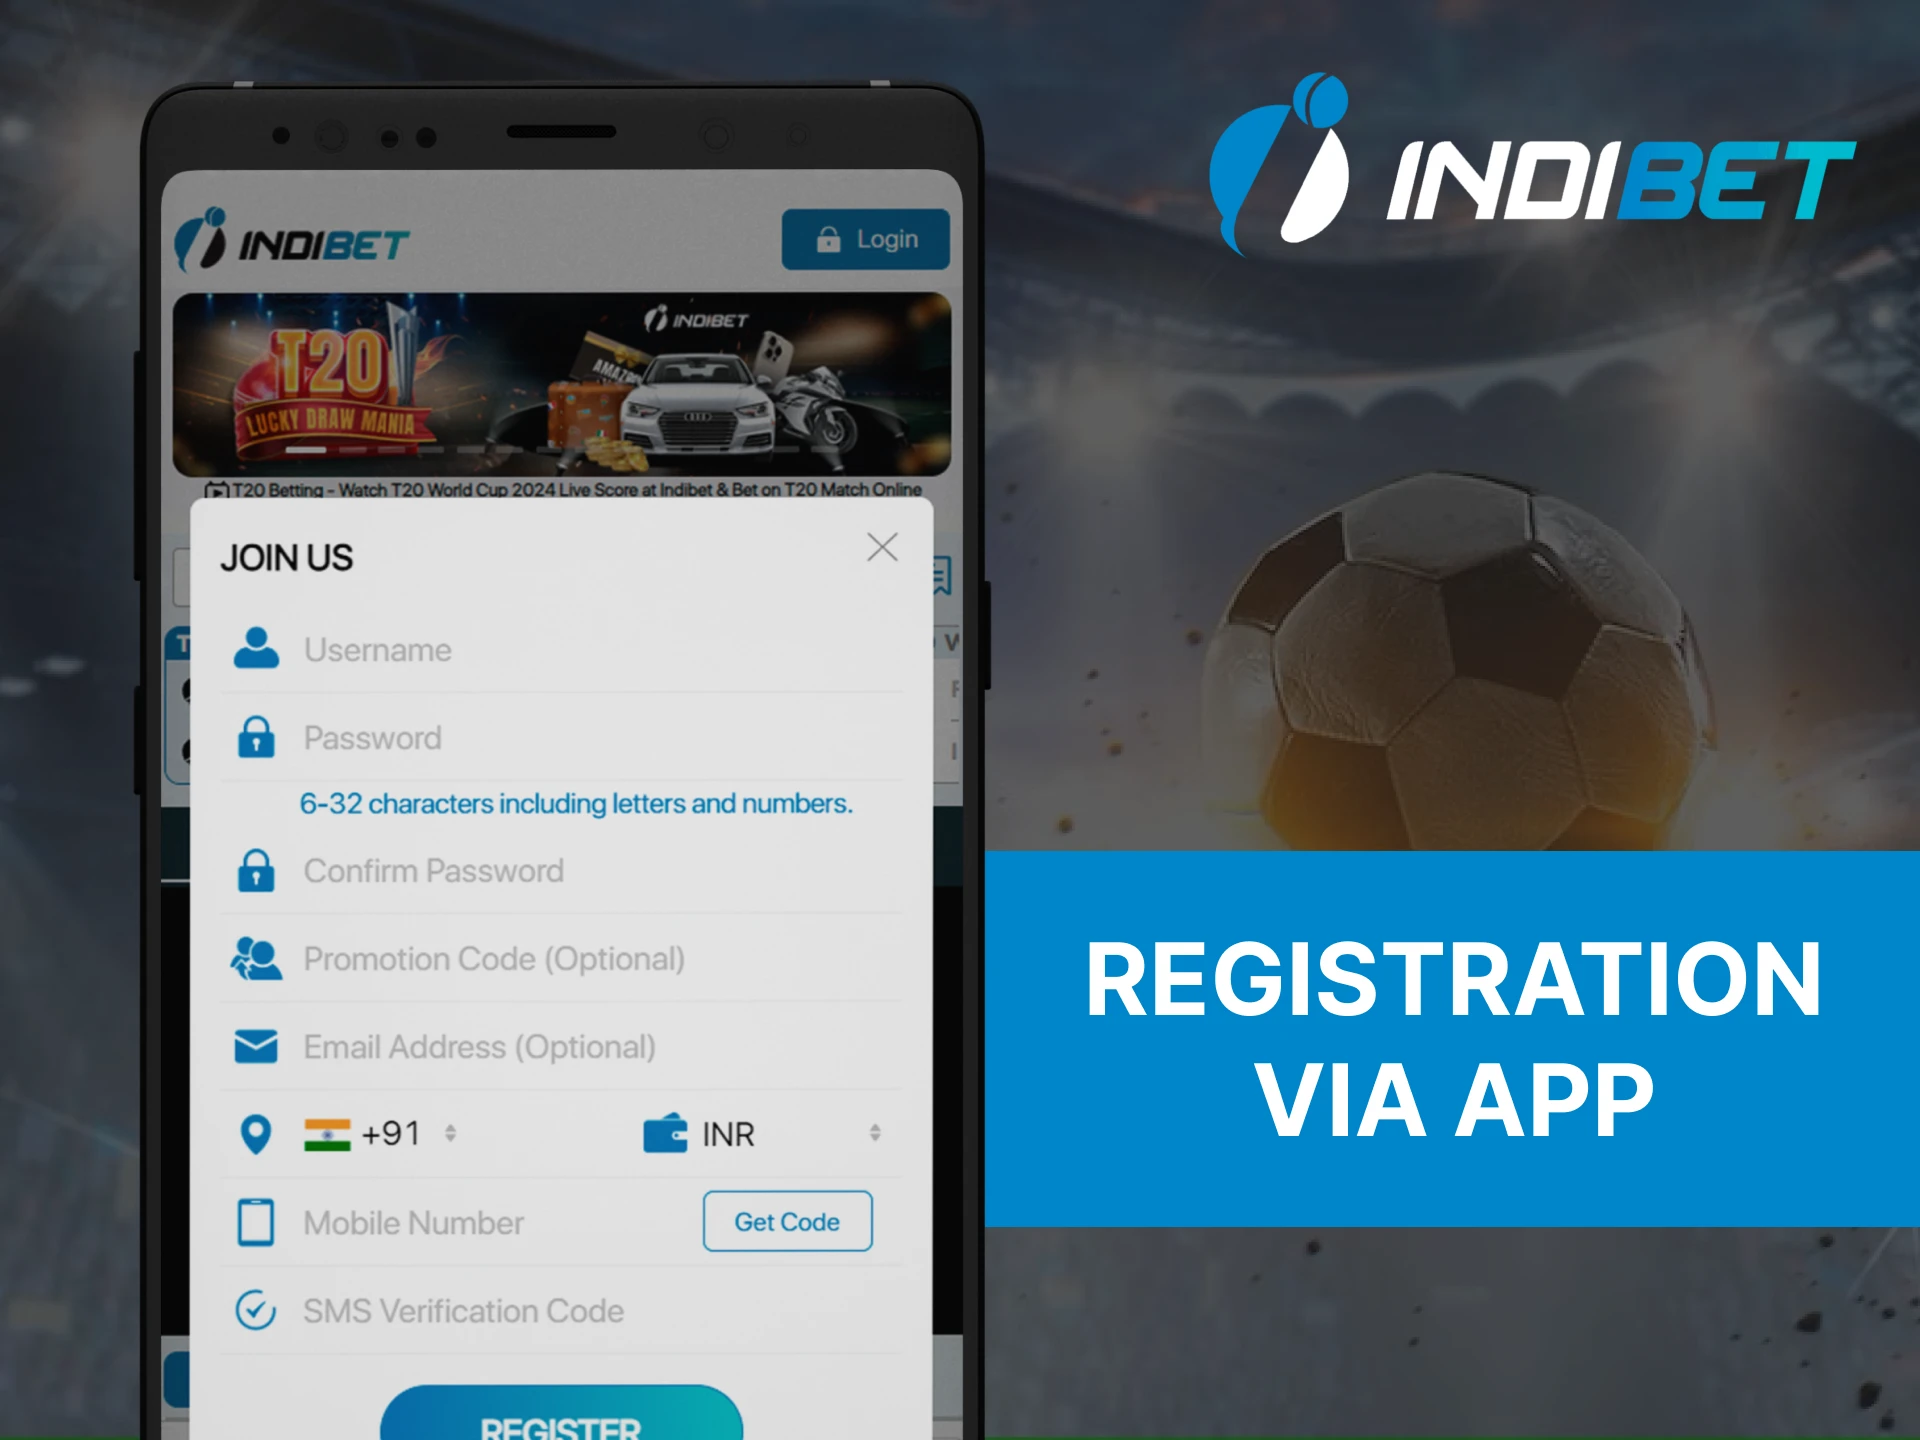 The registration form on the Indibet mobile app is the same as on their website.